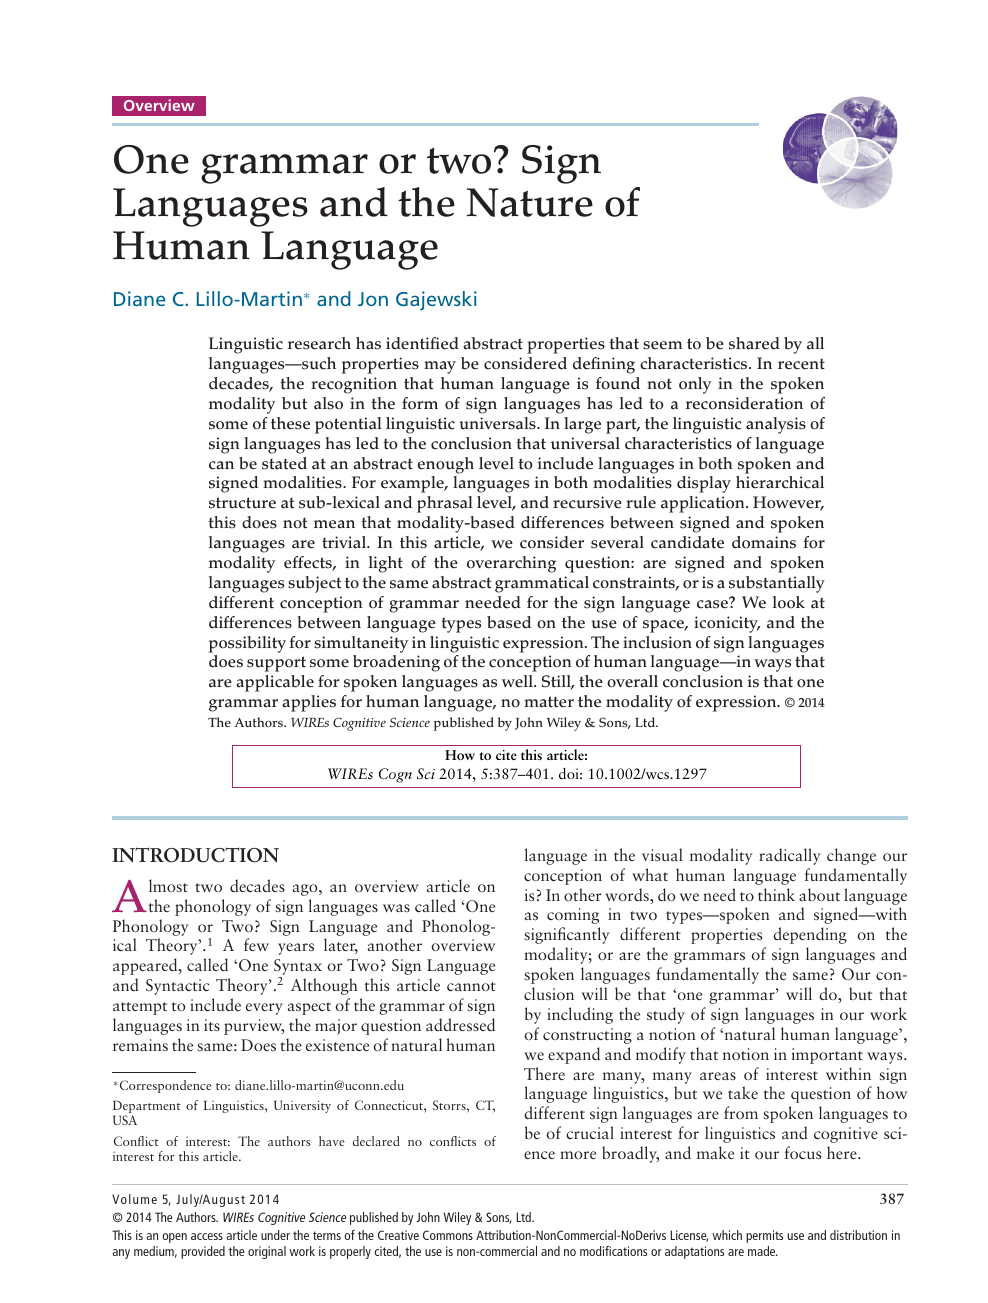 One grammar or two? Sign Languages and the Nature of Human Language – topic of research paper in Psychology. Download scholarly article PDF and read for free on CyberLeninka science hub.